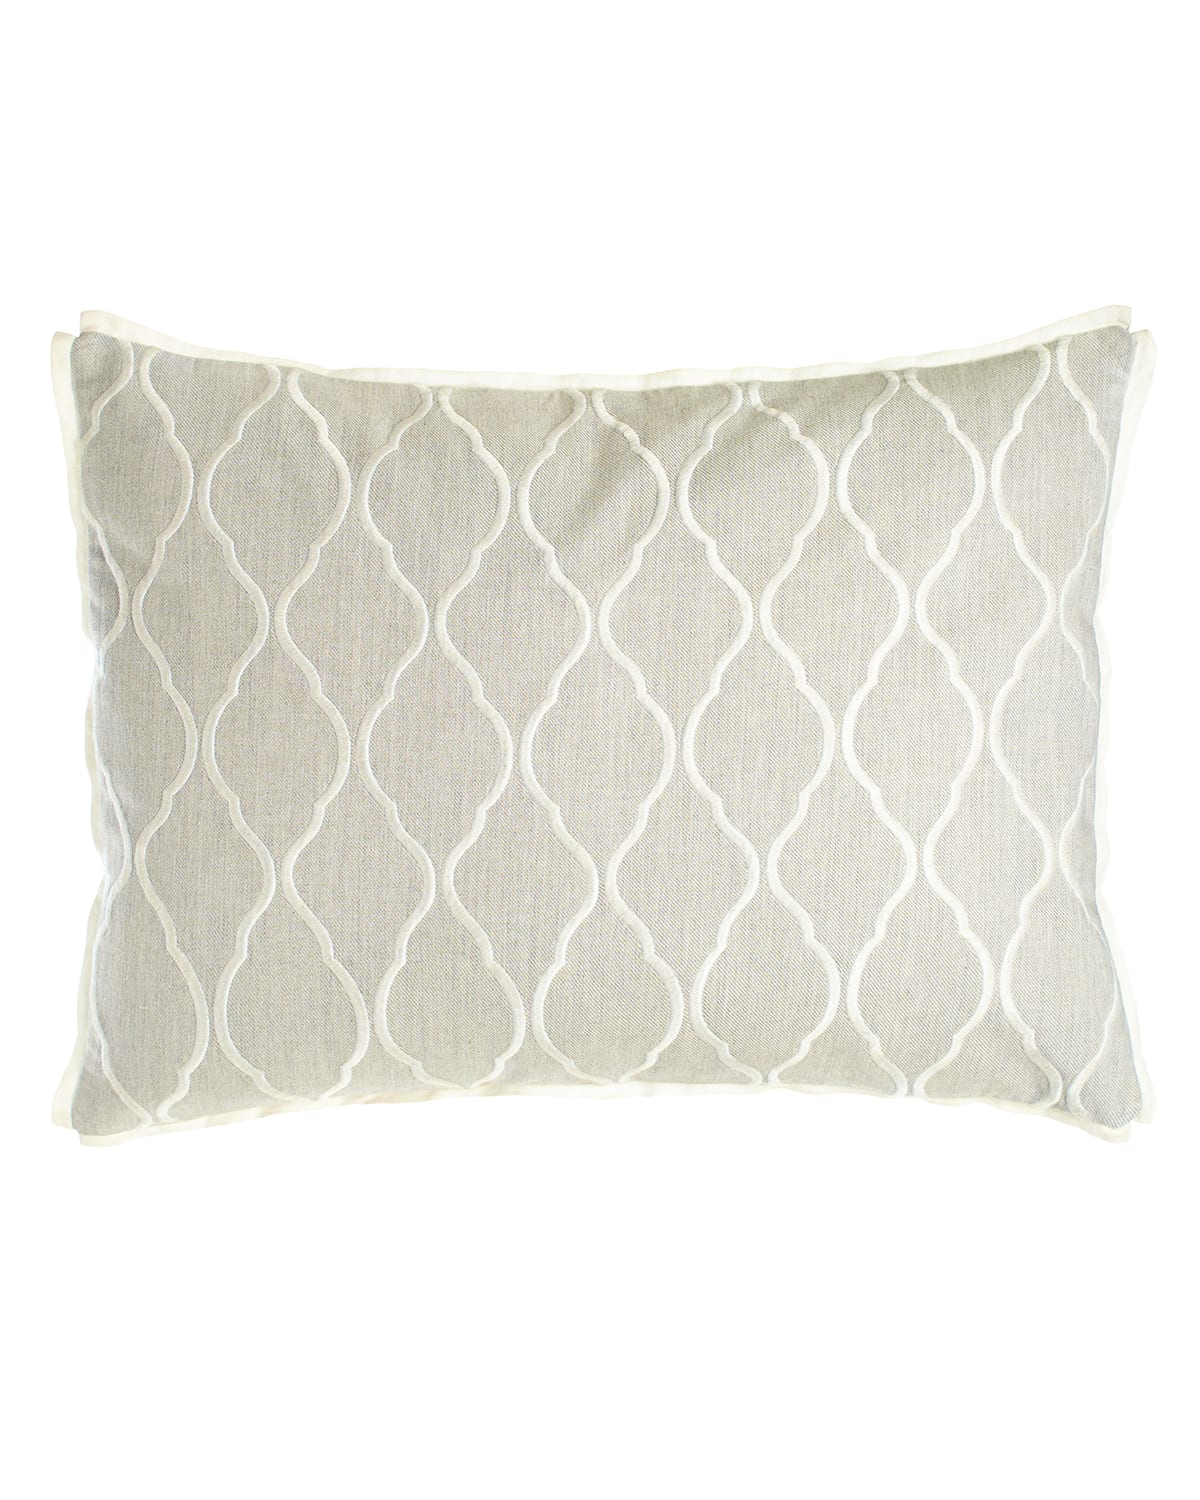 Image Vera Wang Embroidered Ogee Pillow, 15" x 20"